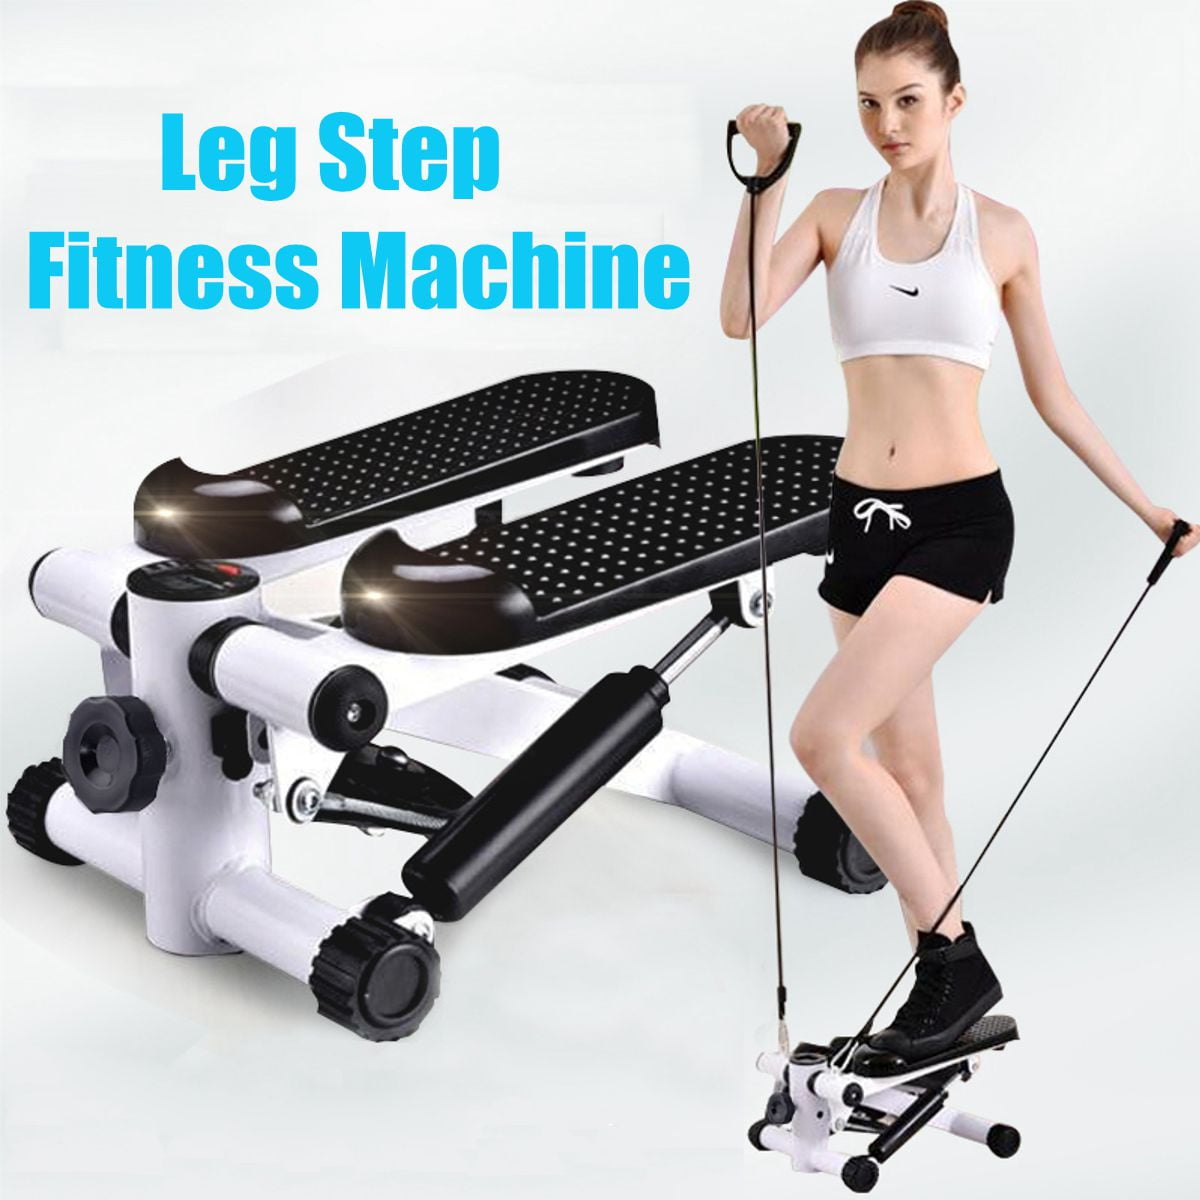 Gray Folding Stair Climbing Machine Workout Stepper Twist Machine with Handle and LCD Monitor for Fitness Ab Exercise Home Office Gym Use Greensen Twist Stepper for Exercise 